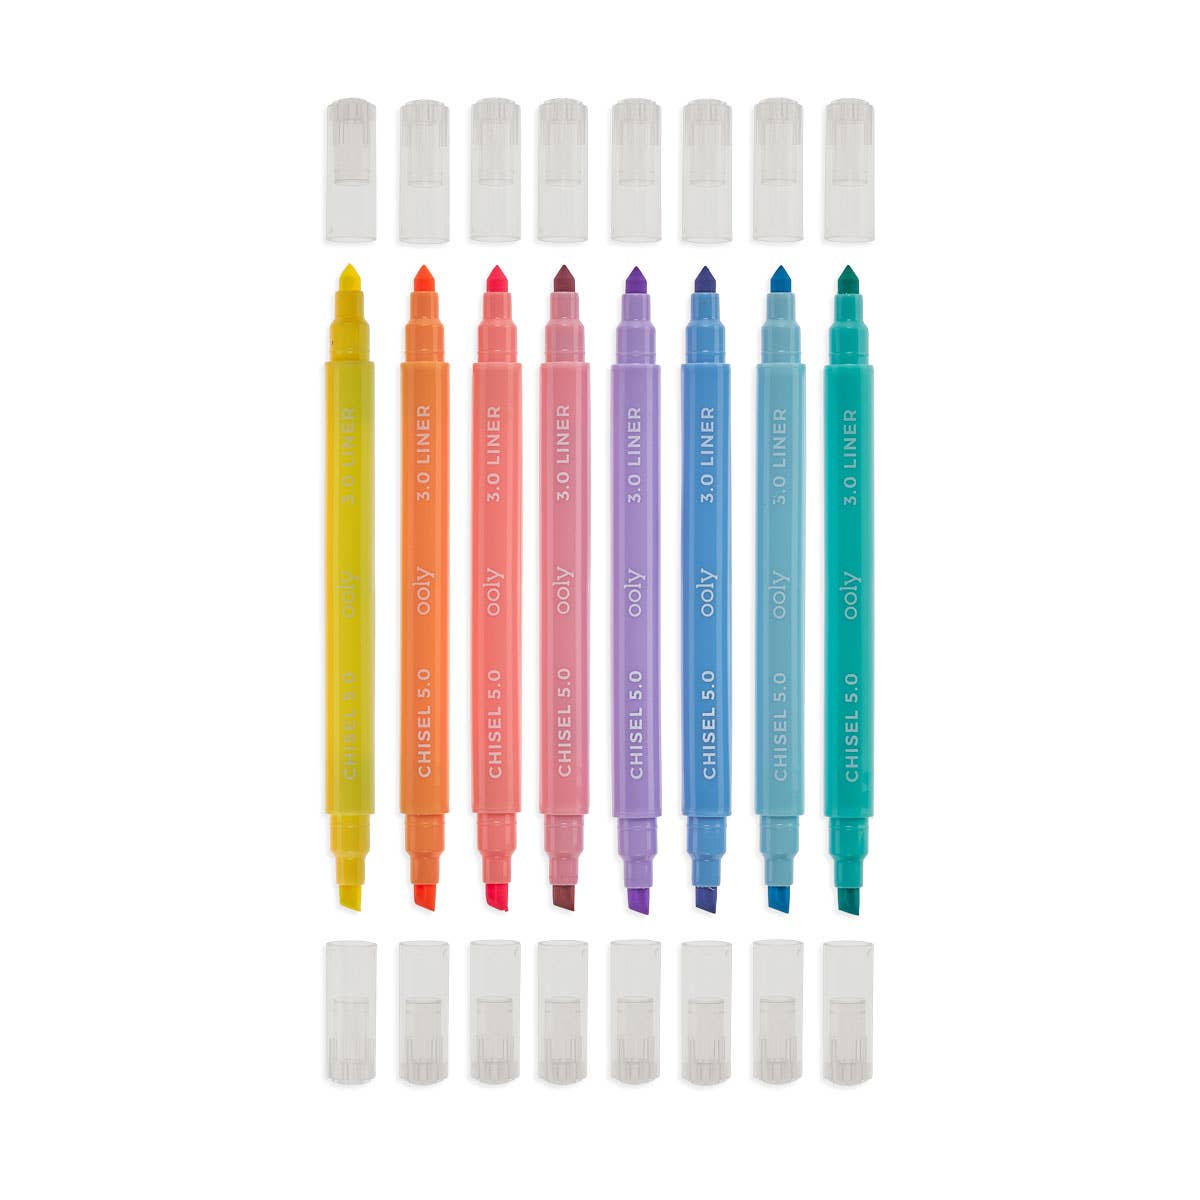 Pastel Liner Double Ended Markers